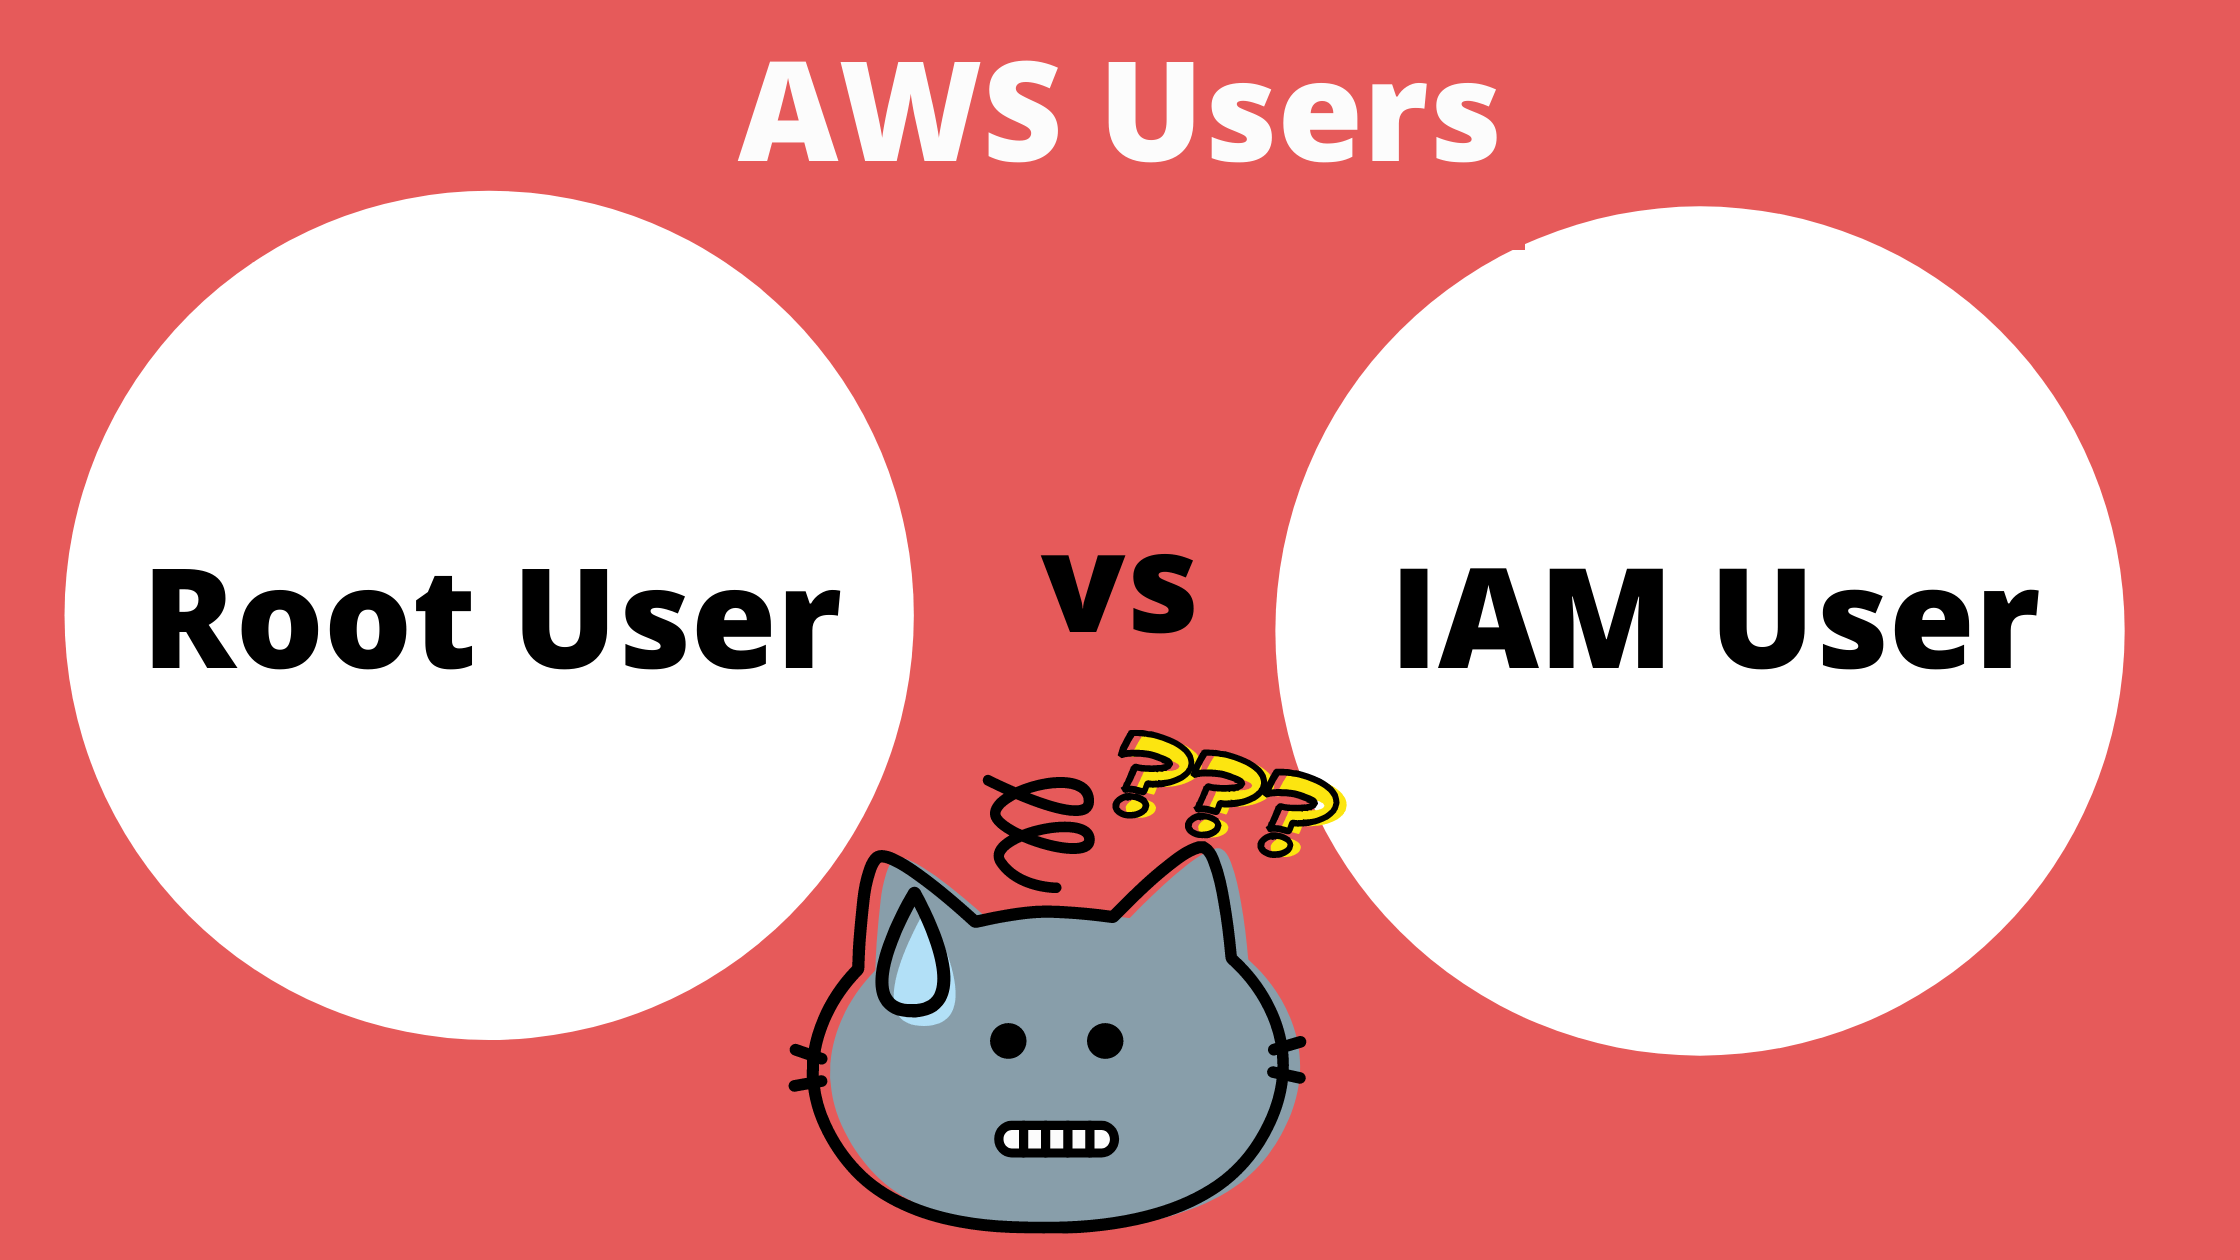 Difference between Root User and IAM User in AWS